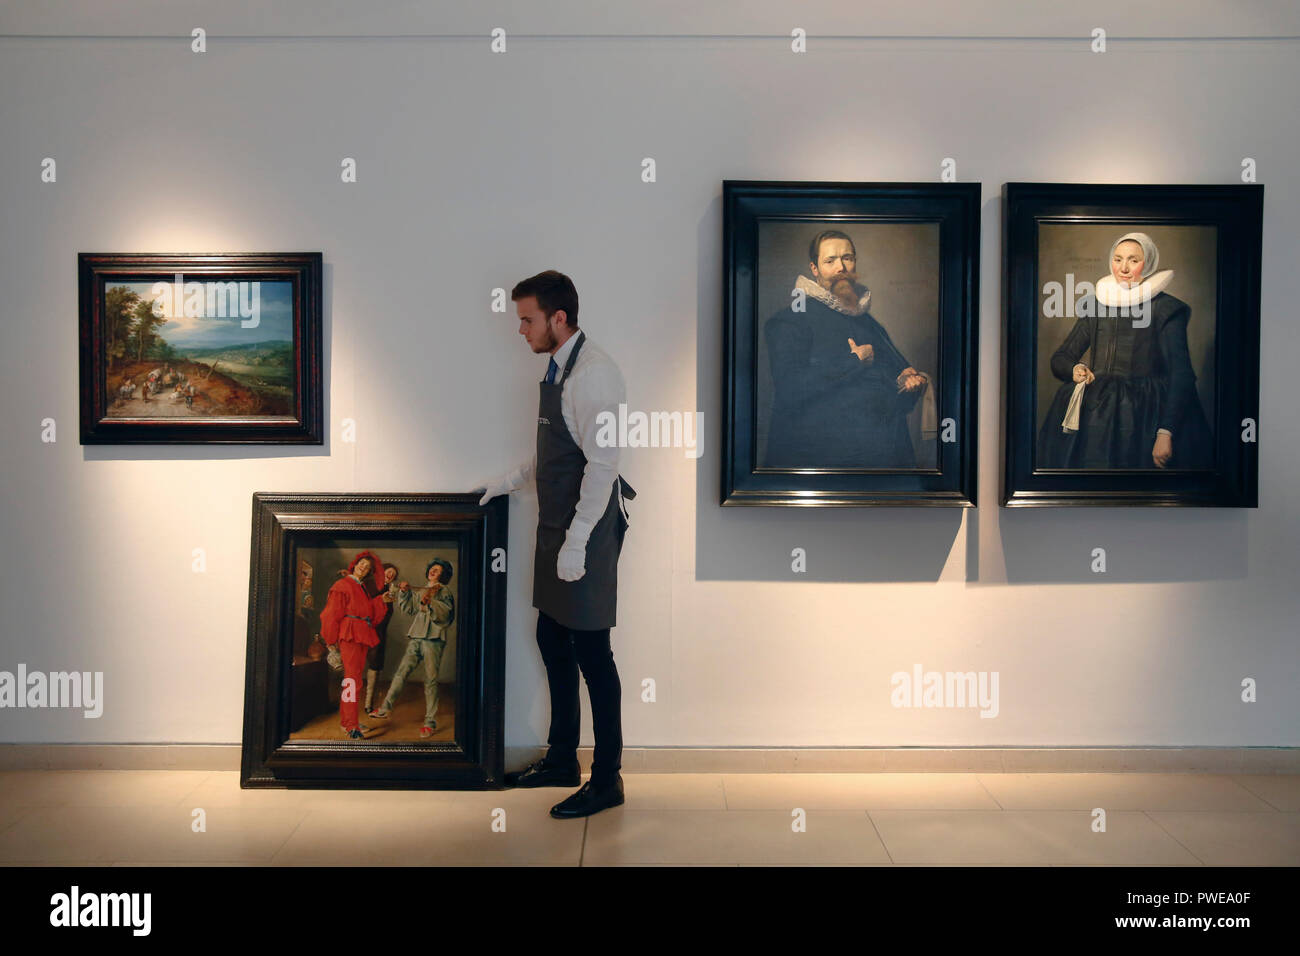 London, UK, 16th Oct 2018. A Christie's art handler stands with artworks by Dutch masters, (L-R) Jan Breughel the Elder 's 'An extensive wooded landscapef'; Judith Leyster 's 'Merry Company'; Frans Hals 'Portrait of a Gentleman holding a pair of gloves' and ' Portrait of a lady holding a handkerchief' at Christie's Auction House in London, UK, Tuesday October 16, 2017. The pieces are expected to achieve £5million, £2.5million and £12million for the pair respectively when they come to auction as part of the Albada Jelgersma Collection sale during Christie's Classic Week in December. Photograph  Stock Photo